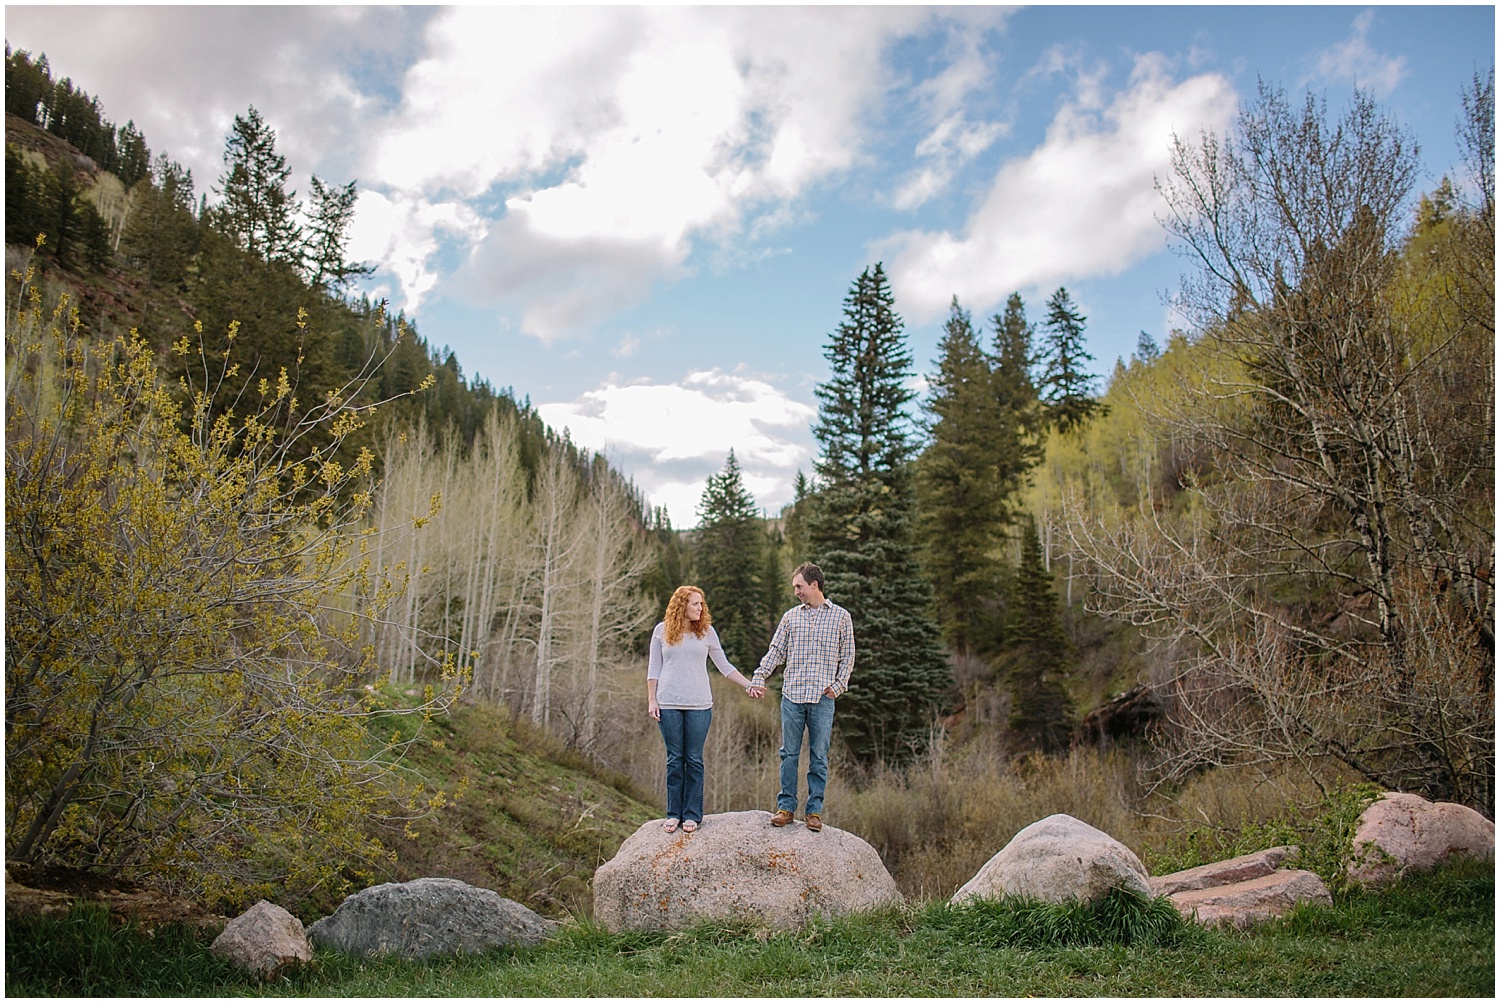 Tom & Bethany – Vail Engagement Session